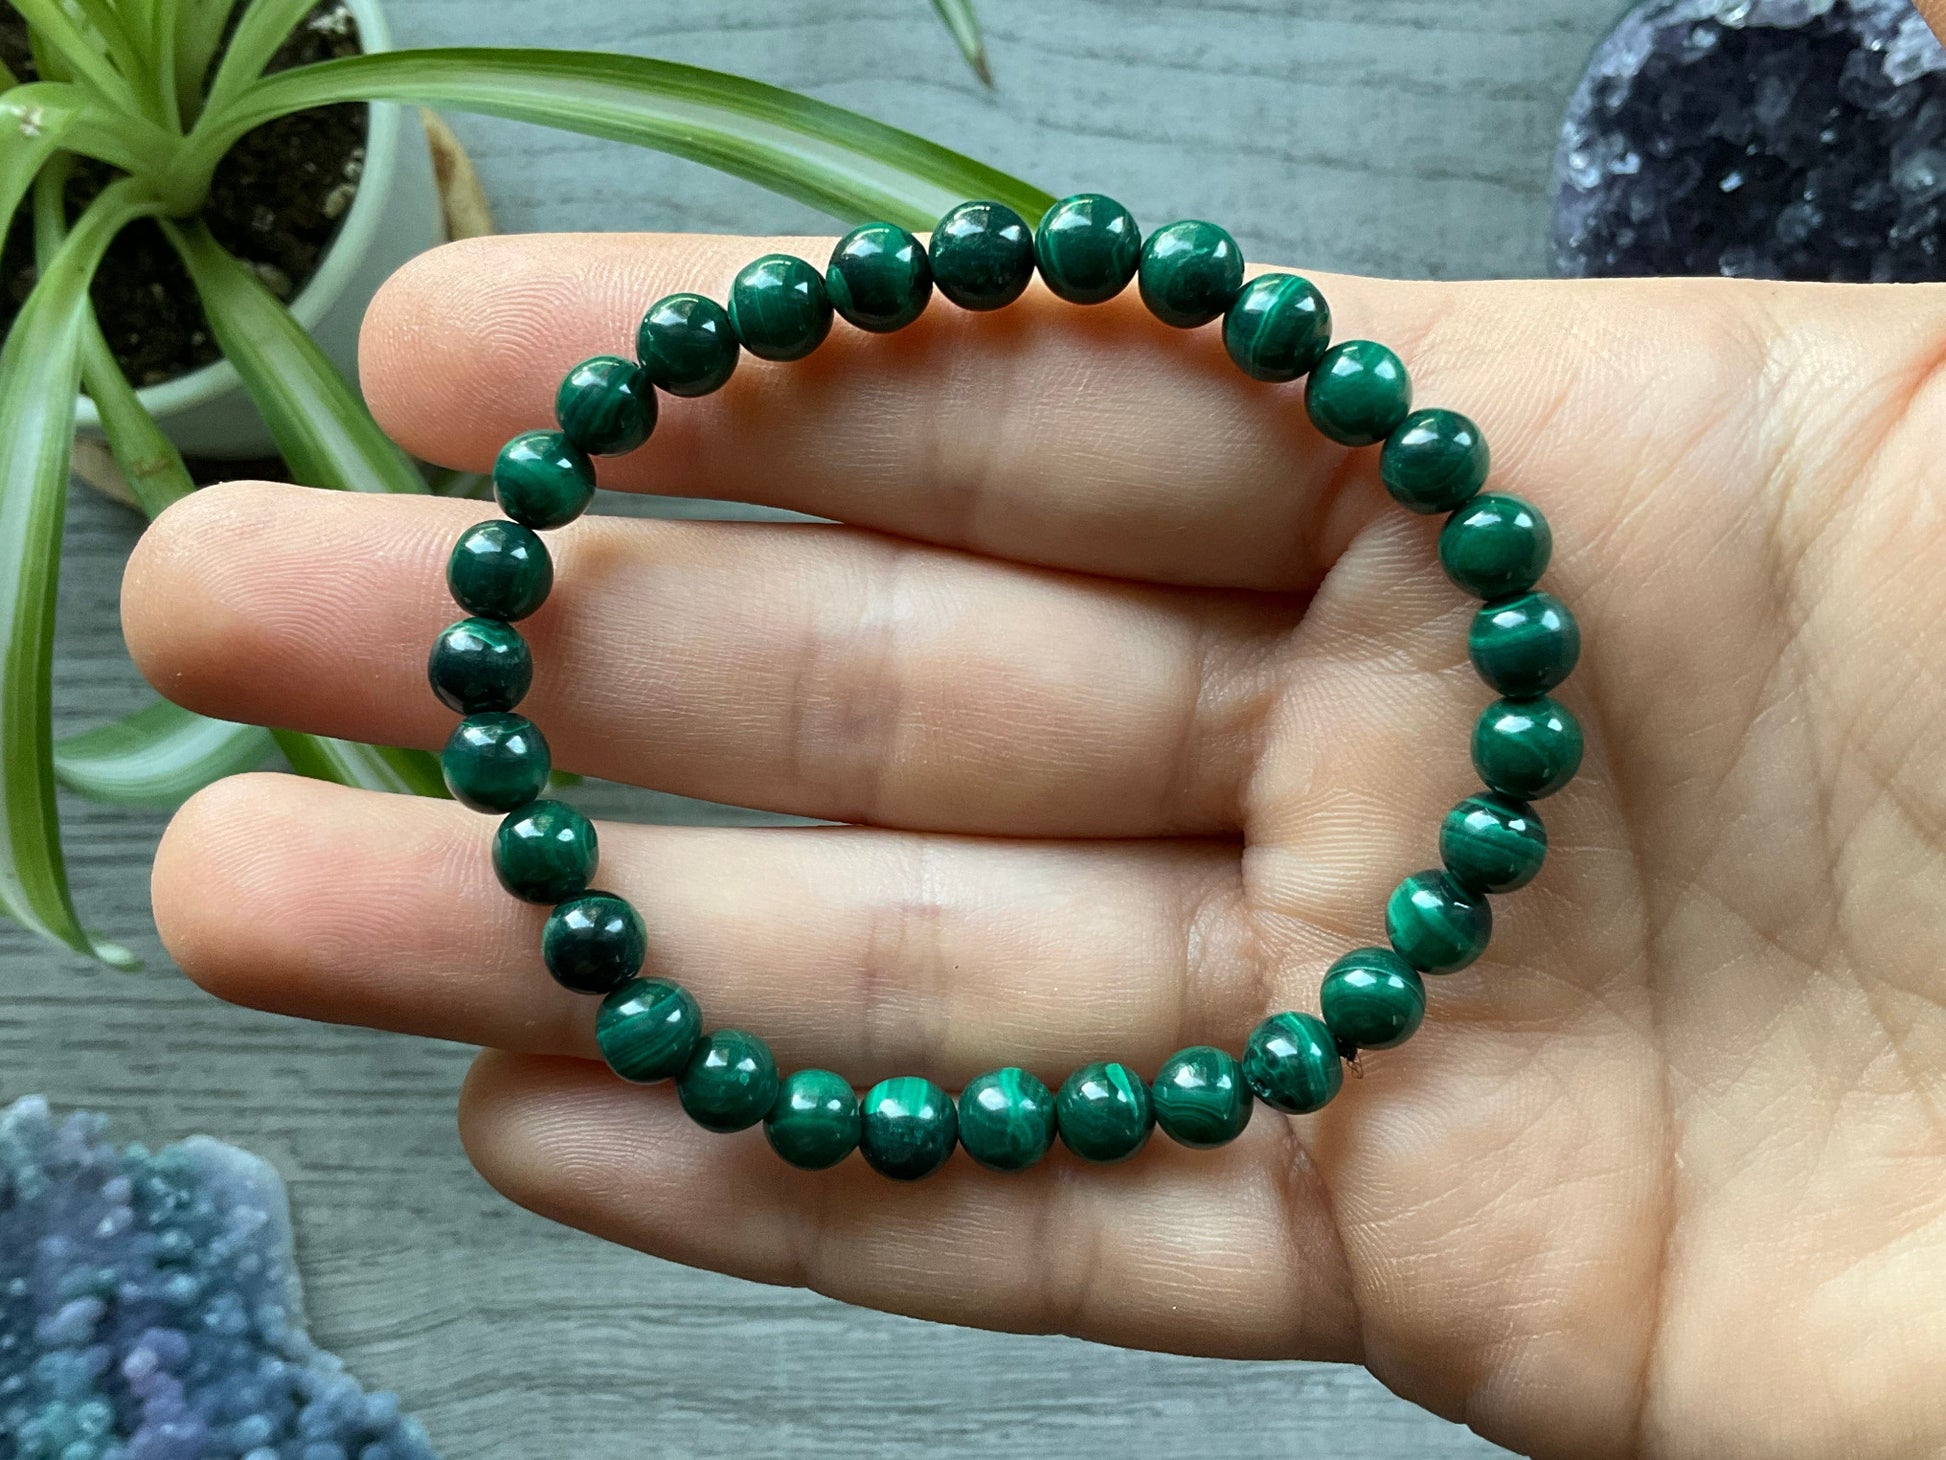 Pictured is a malachite bead bracelet.